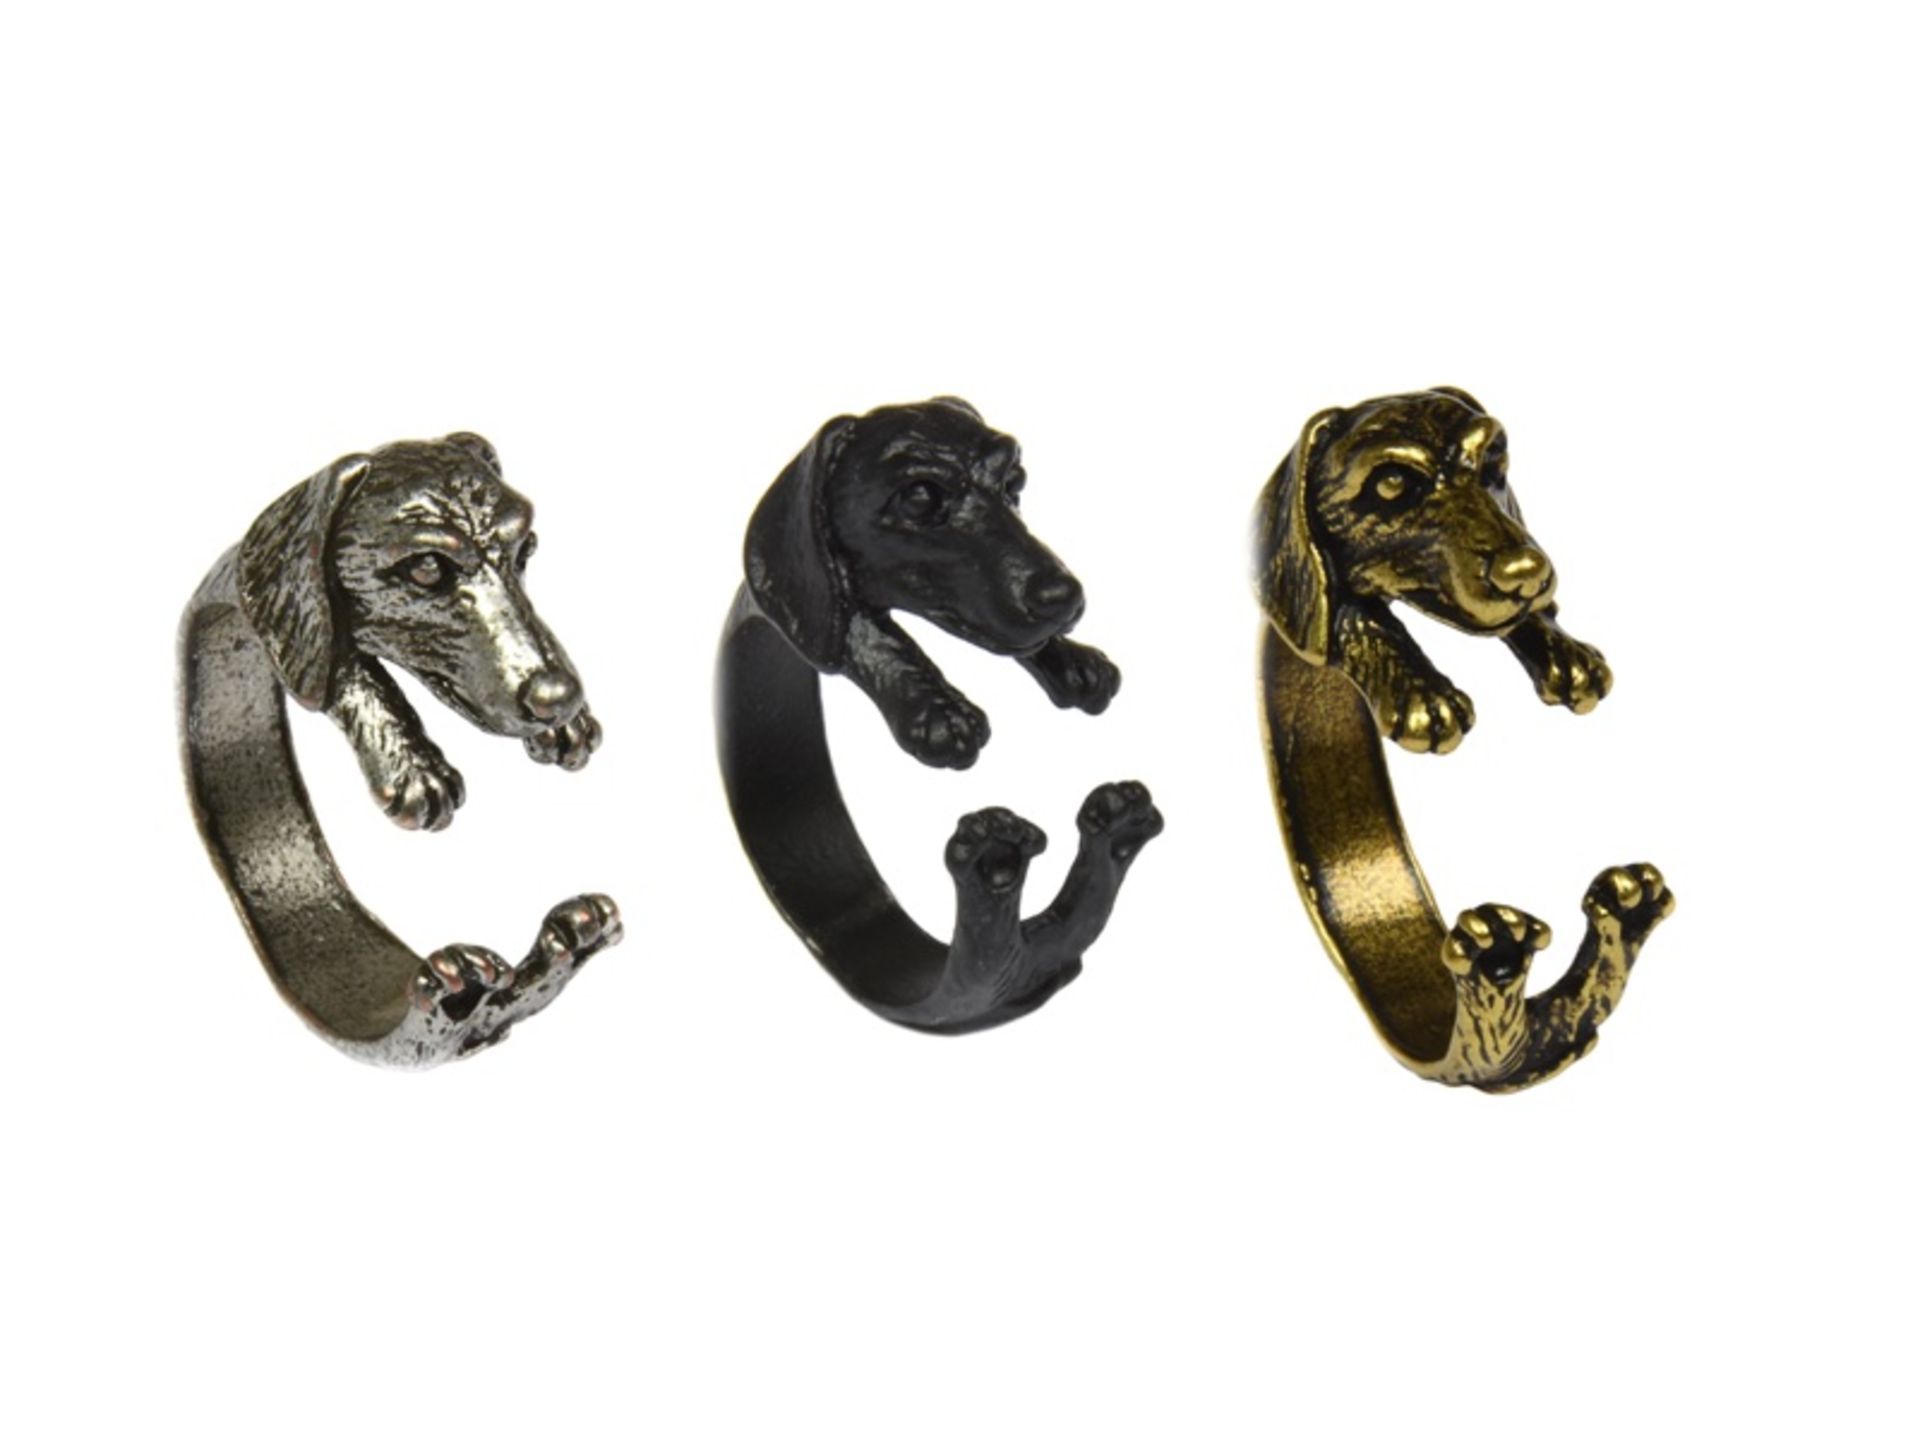 200+ Animal themed rings with velvet accessories bags - New - High Quality - Image 2 of 7